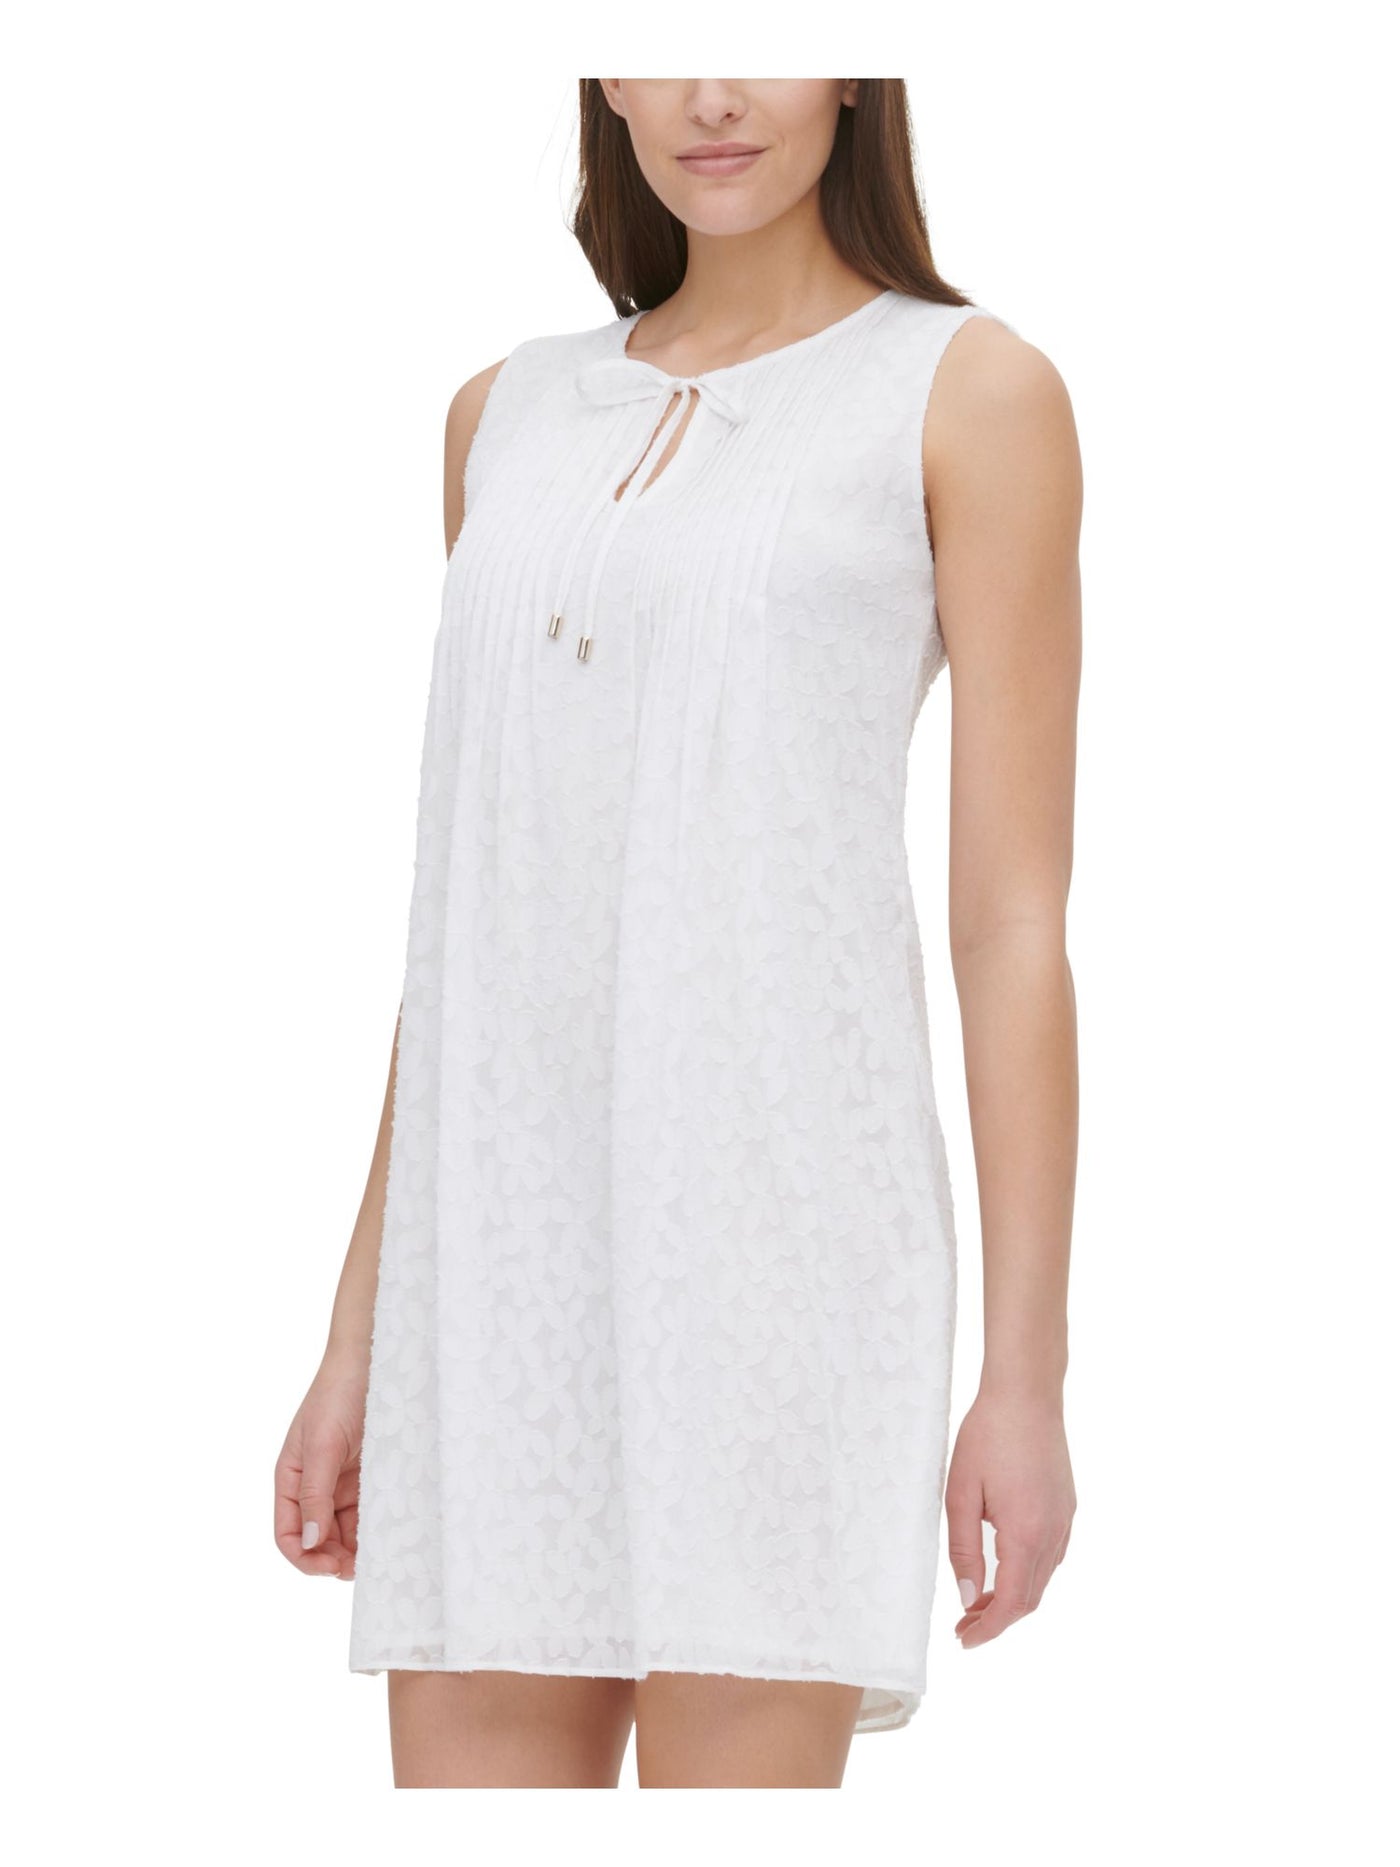 TOMMY HILFIGER Womens Ivory Textured Pleated Lined Floral Sleeveless Keyhole Short Shift Dress 4